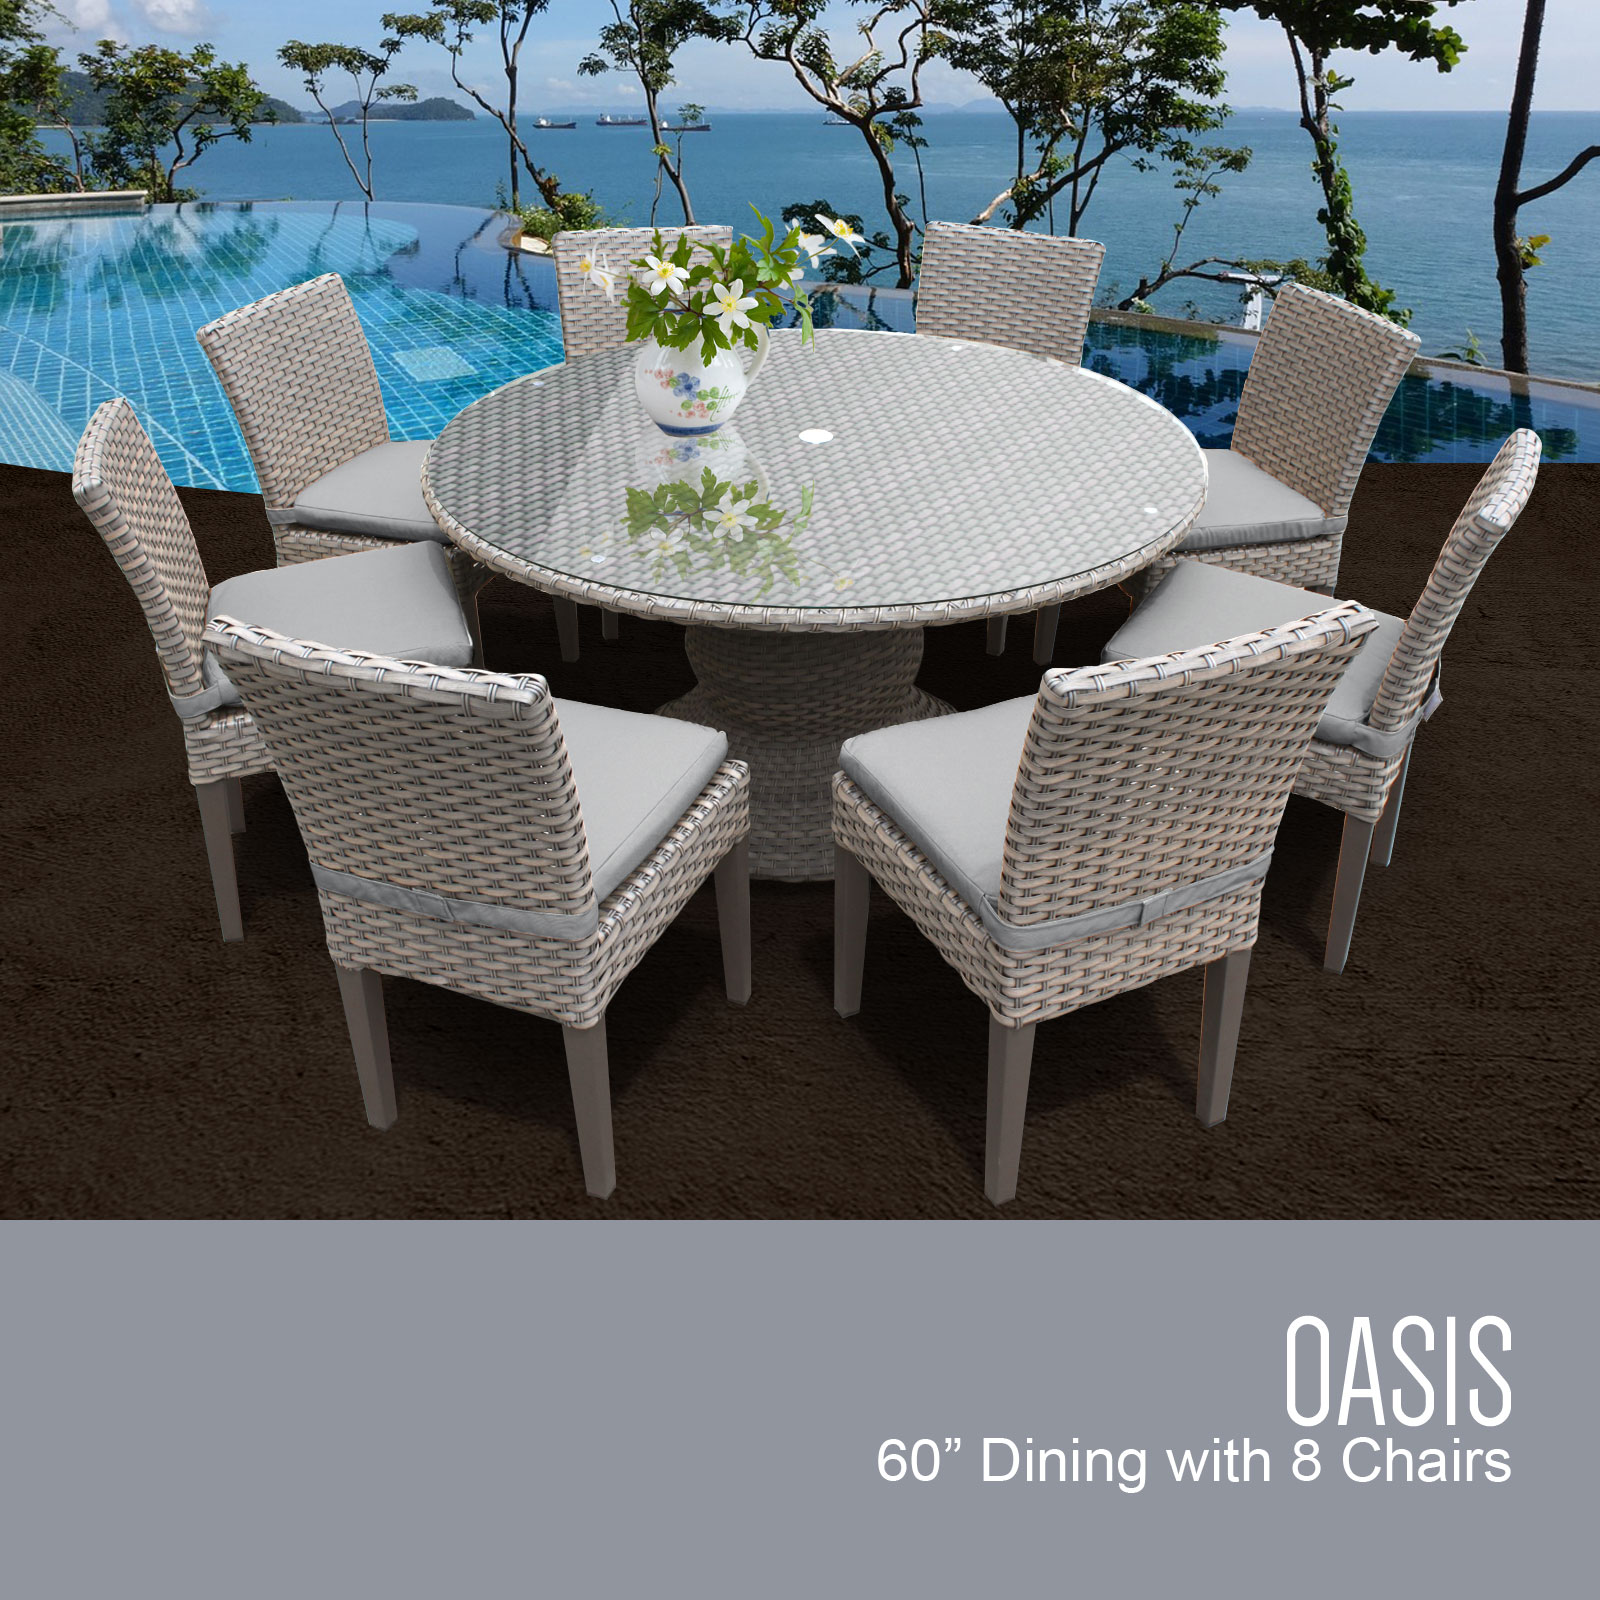 Oasis 60 Inch Outdoor Patio Dining Table with 8 Armless Chairs